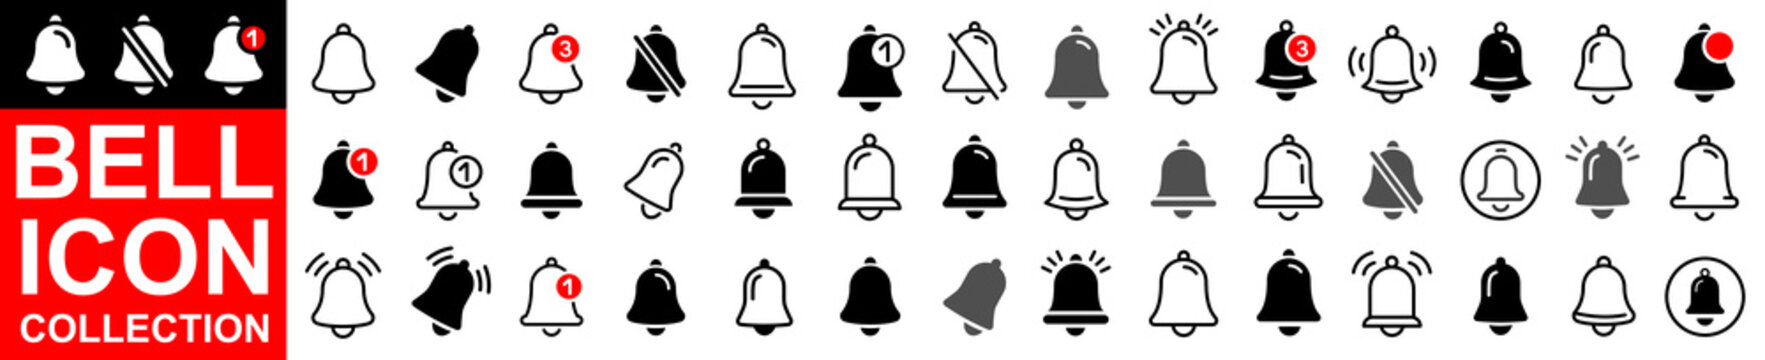 Notification bell big icon set. Notice message. Alarm symbol.Incoming inbox message. New message notofication icons. Set of ringing bells with new notification. Vector illustration.